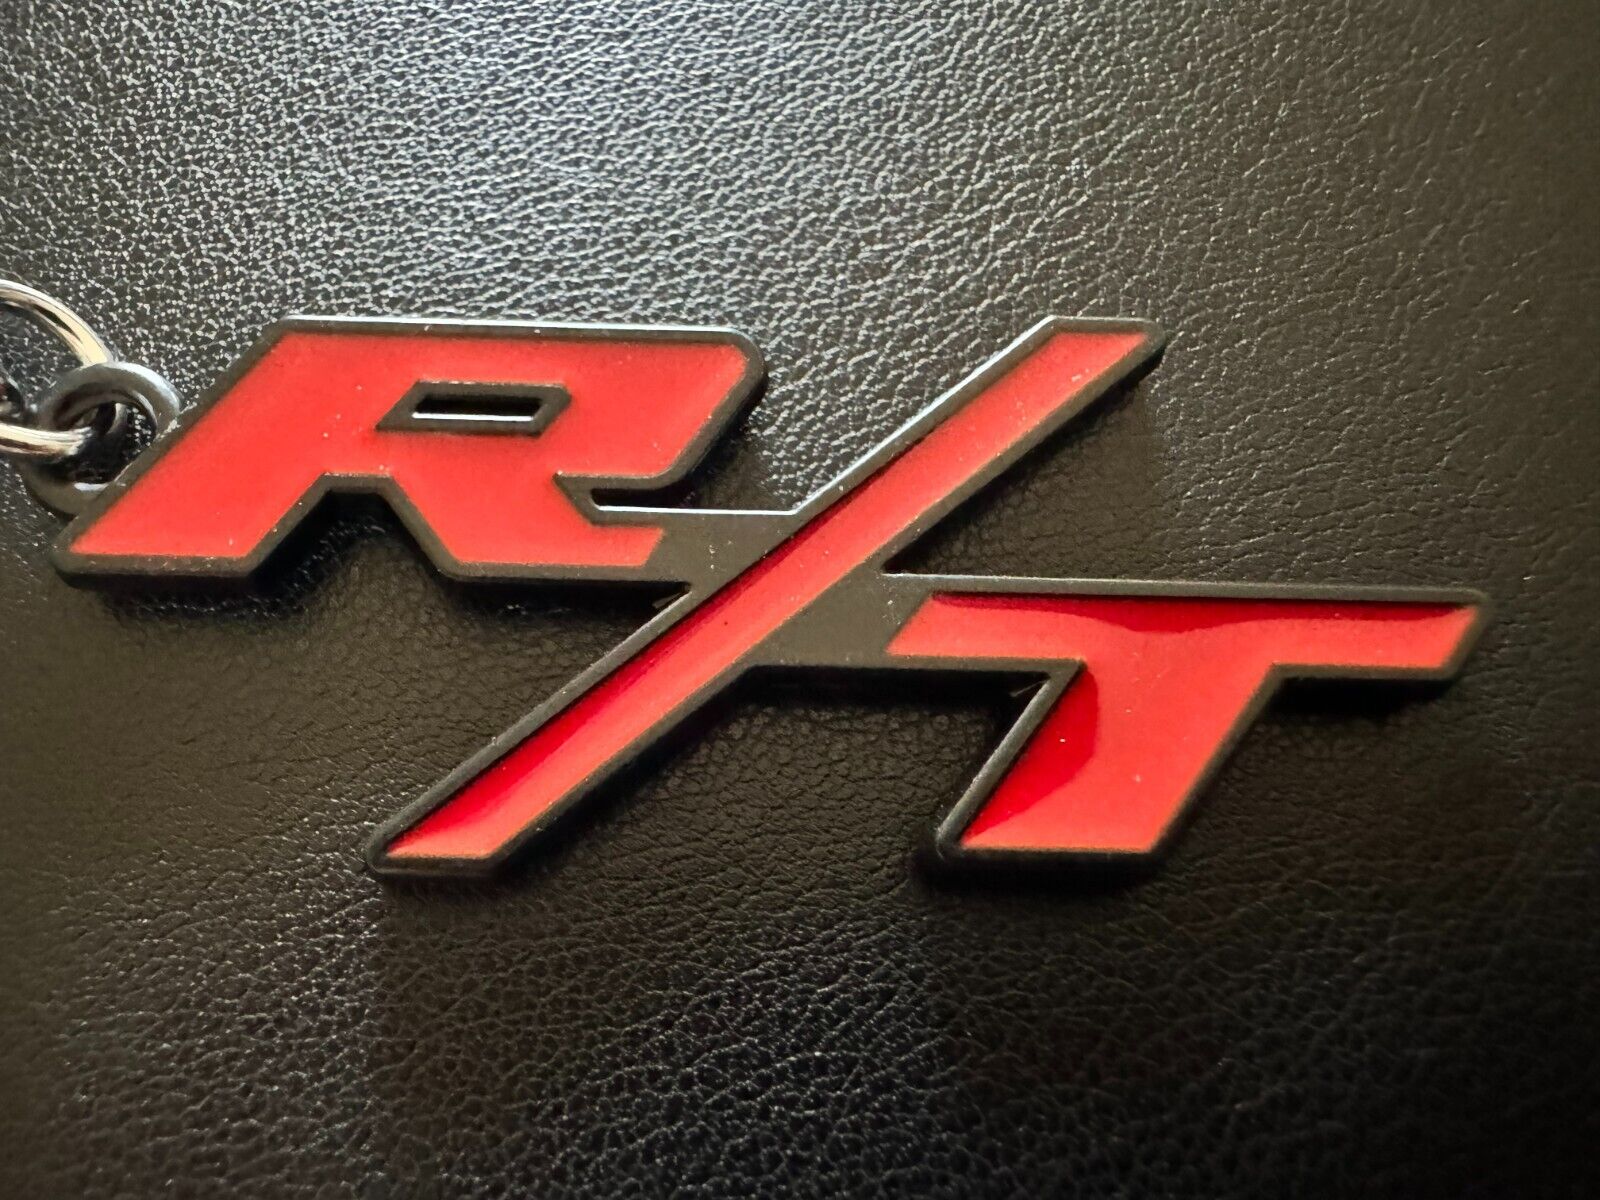 Dodge R/T Keychain-Dodge R/T Key Tag, American Muscle Performance, RED/BLACK